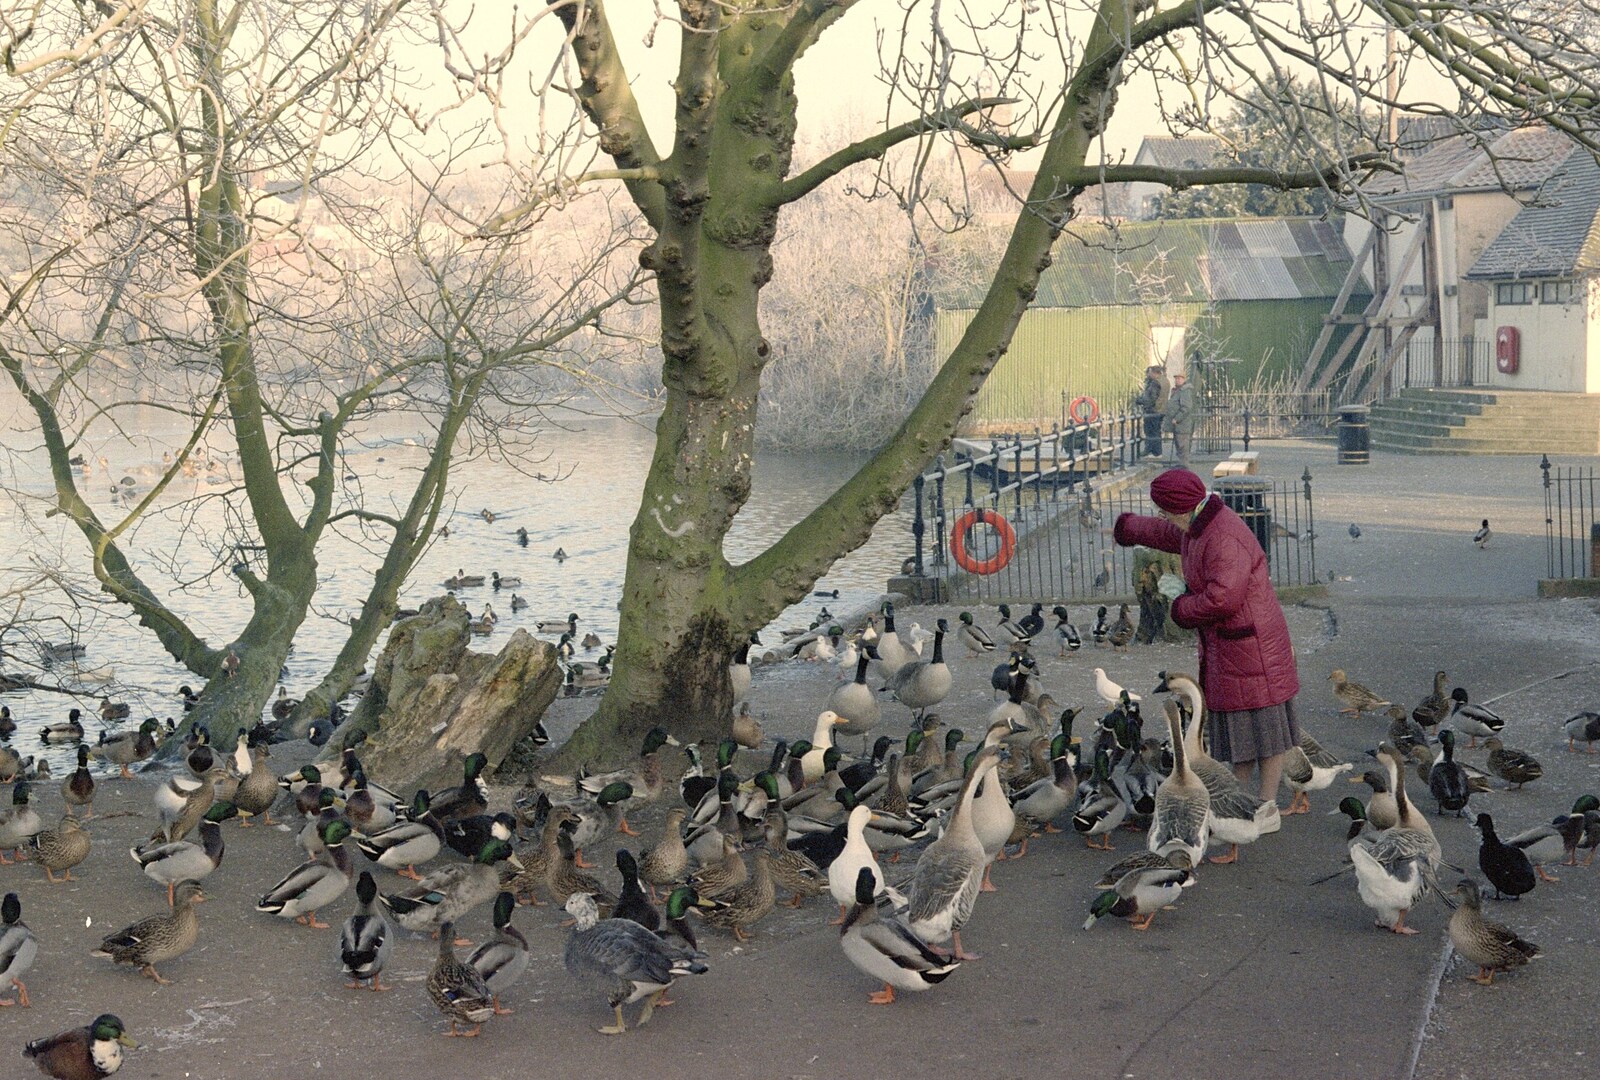 A woman feeds the ducks down at Diss Mere from A Frosty Morning, Suffolk and Norfolk - 15th December 1991